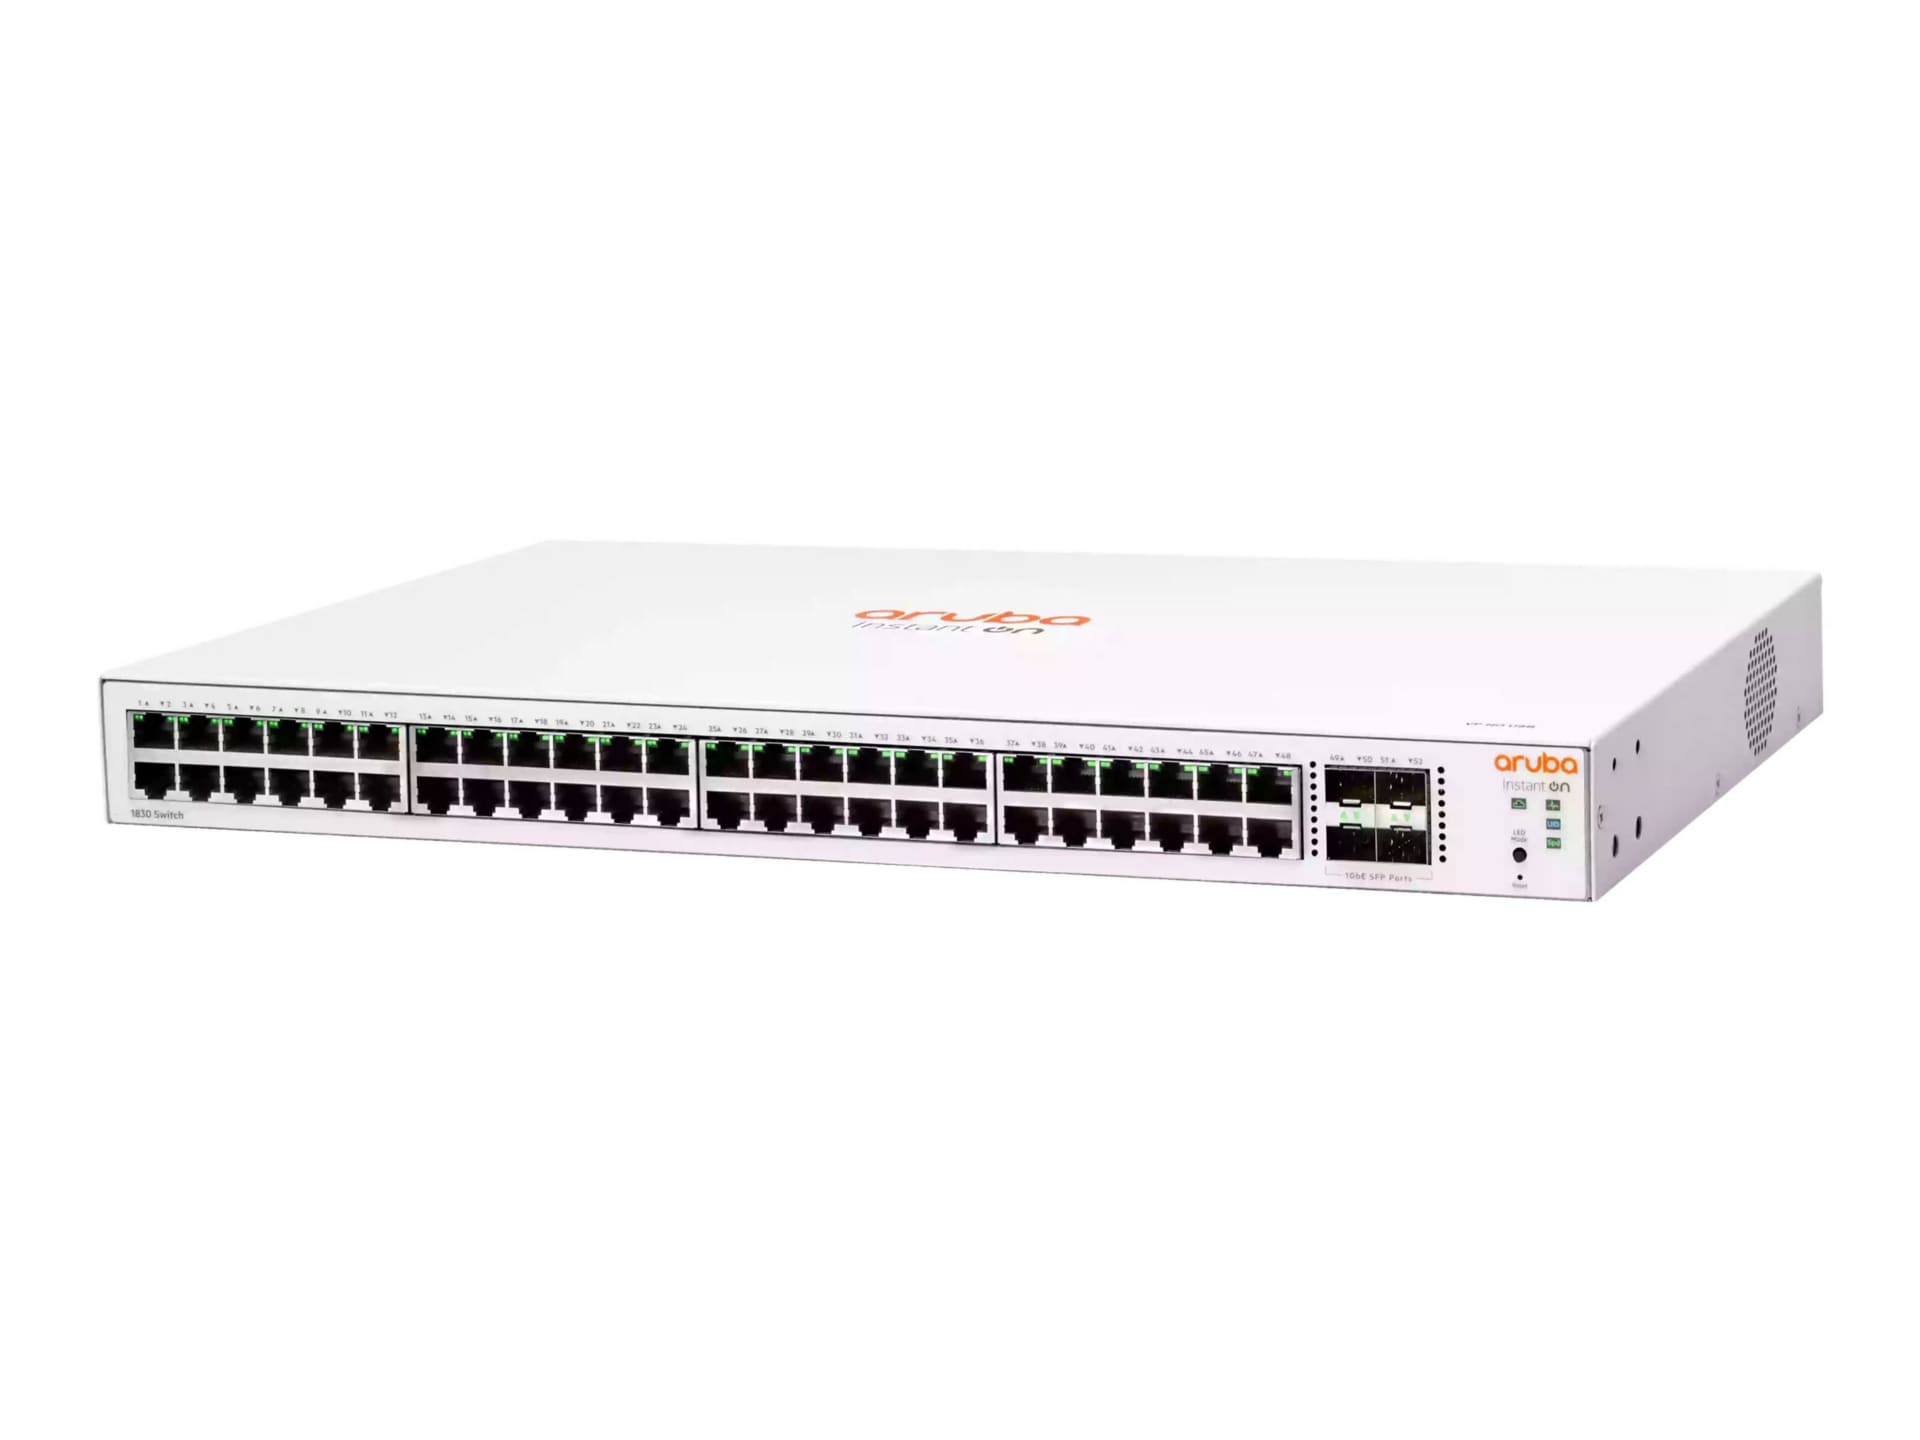 HPE HPE Networking Instant On 1830 48G 4SFP Switch - switch - 48 ports - smart - rack-mountable